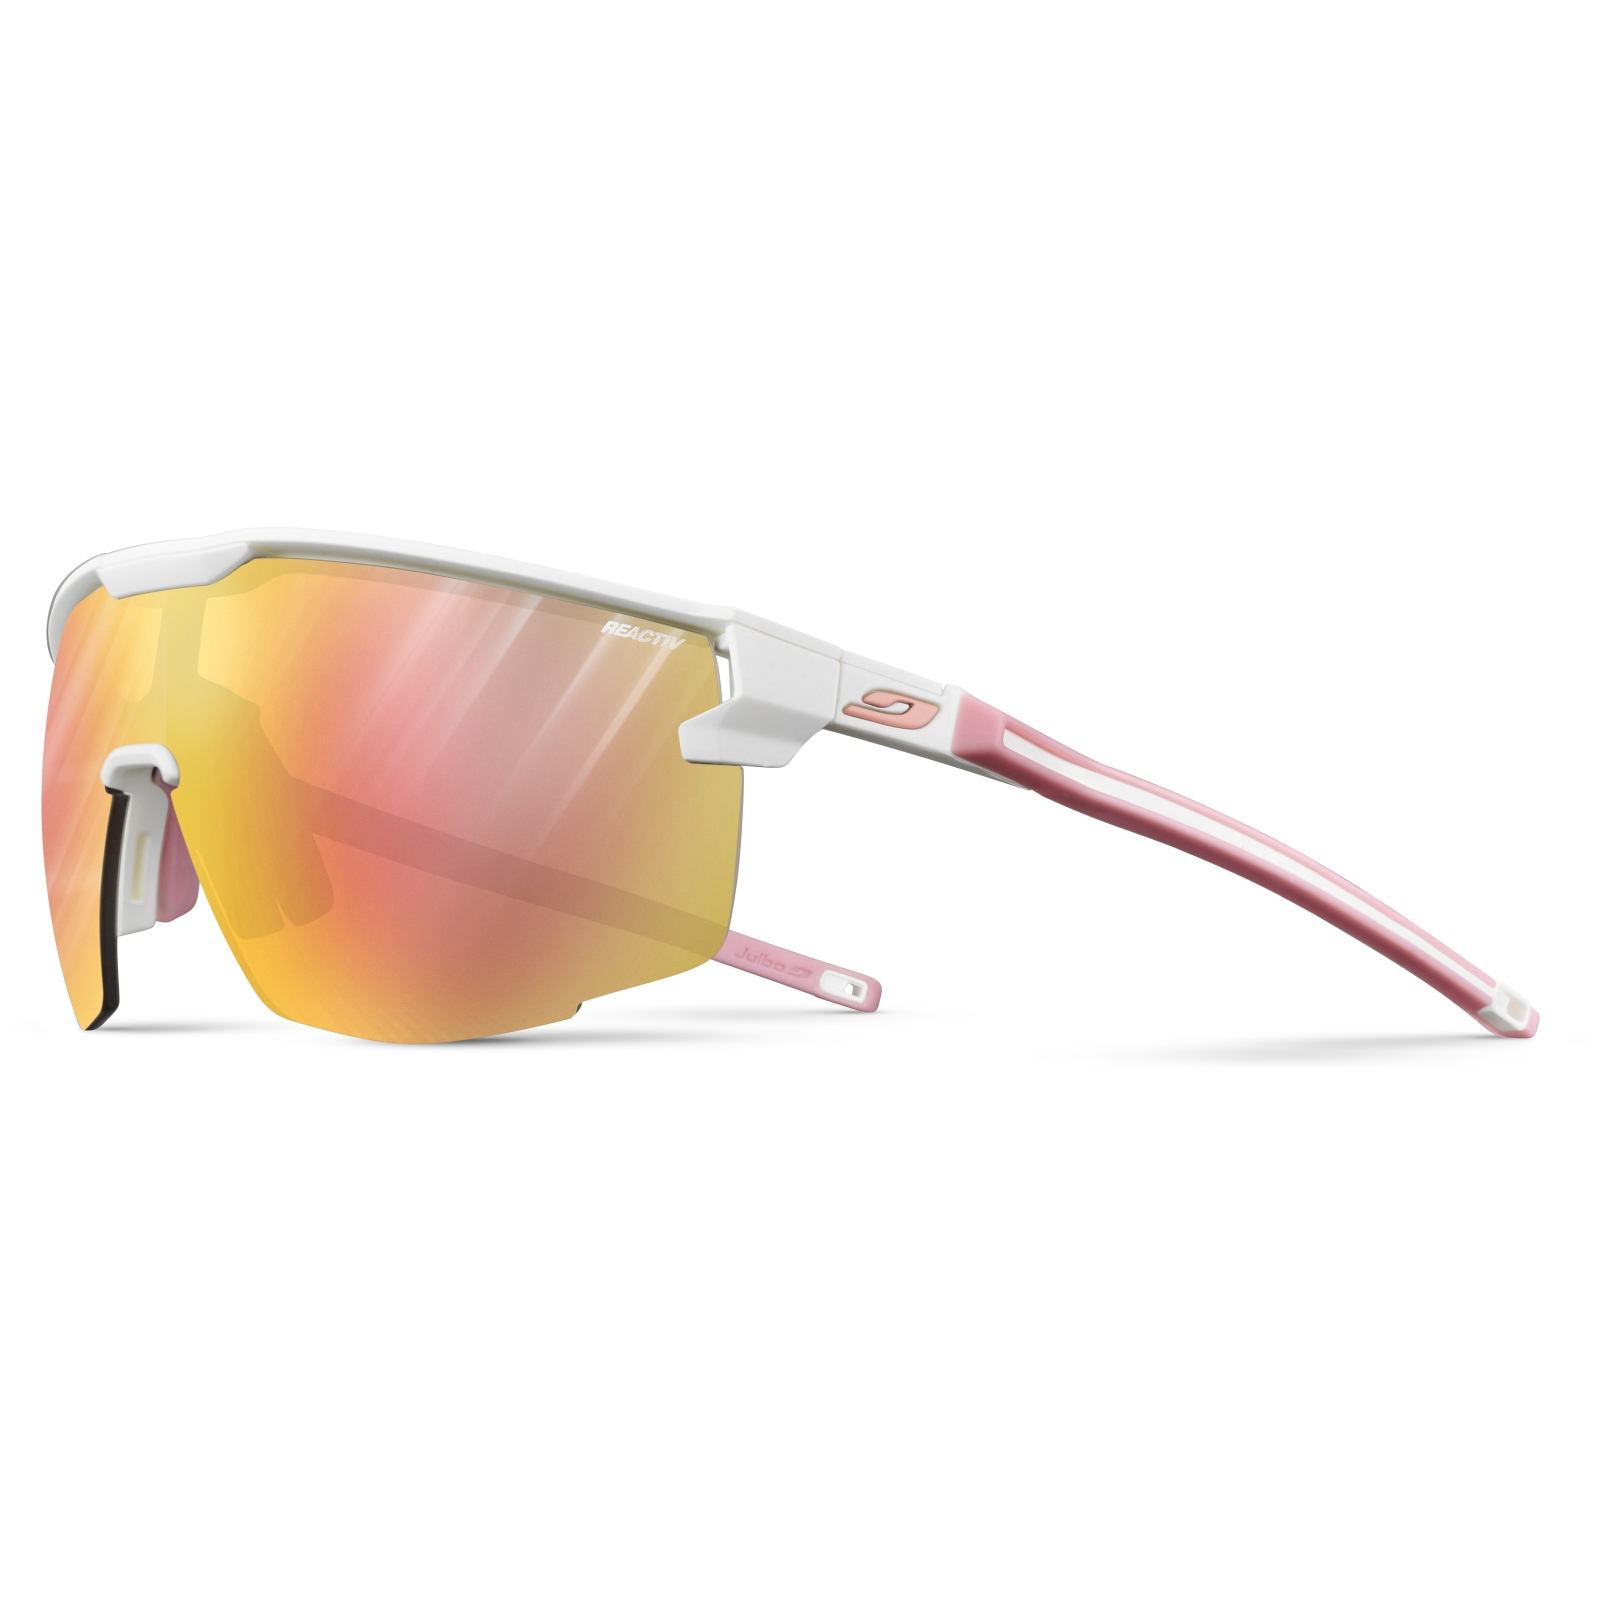 Picture of Julbo Ultimate Reactiv Light Amplifier 1-3 Sunglasses - White / Pink